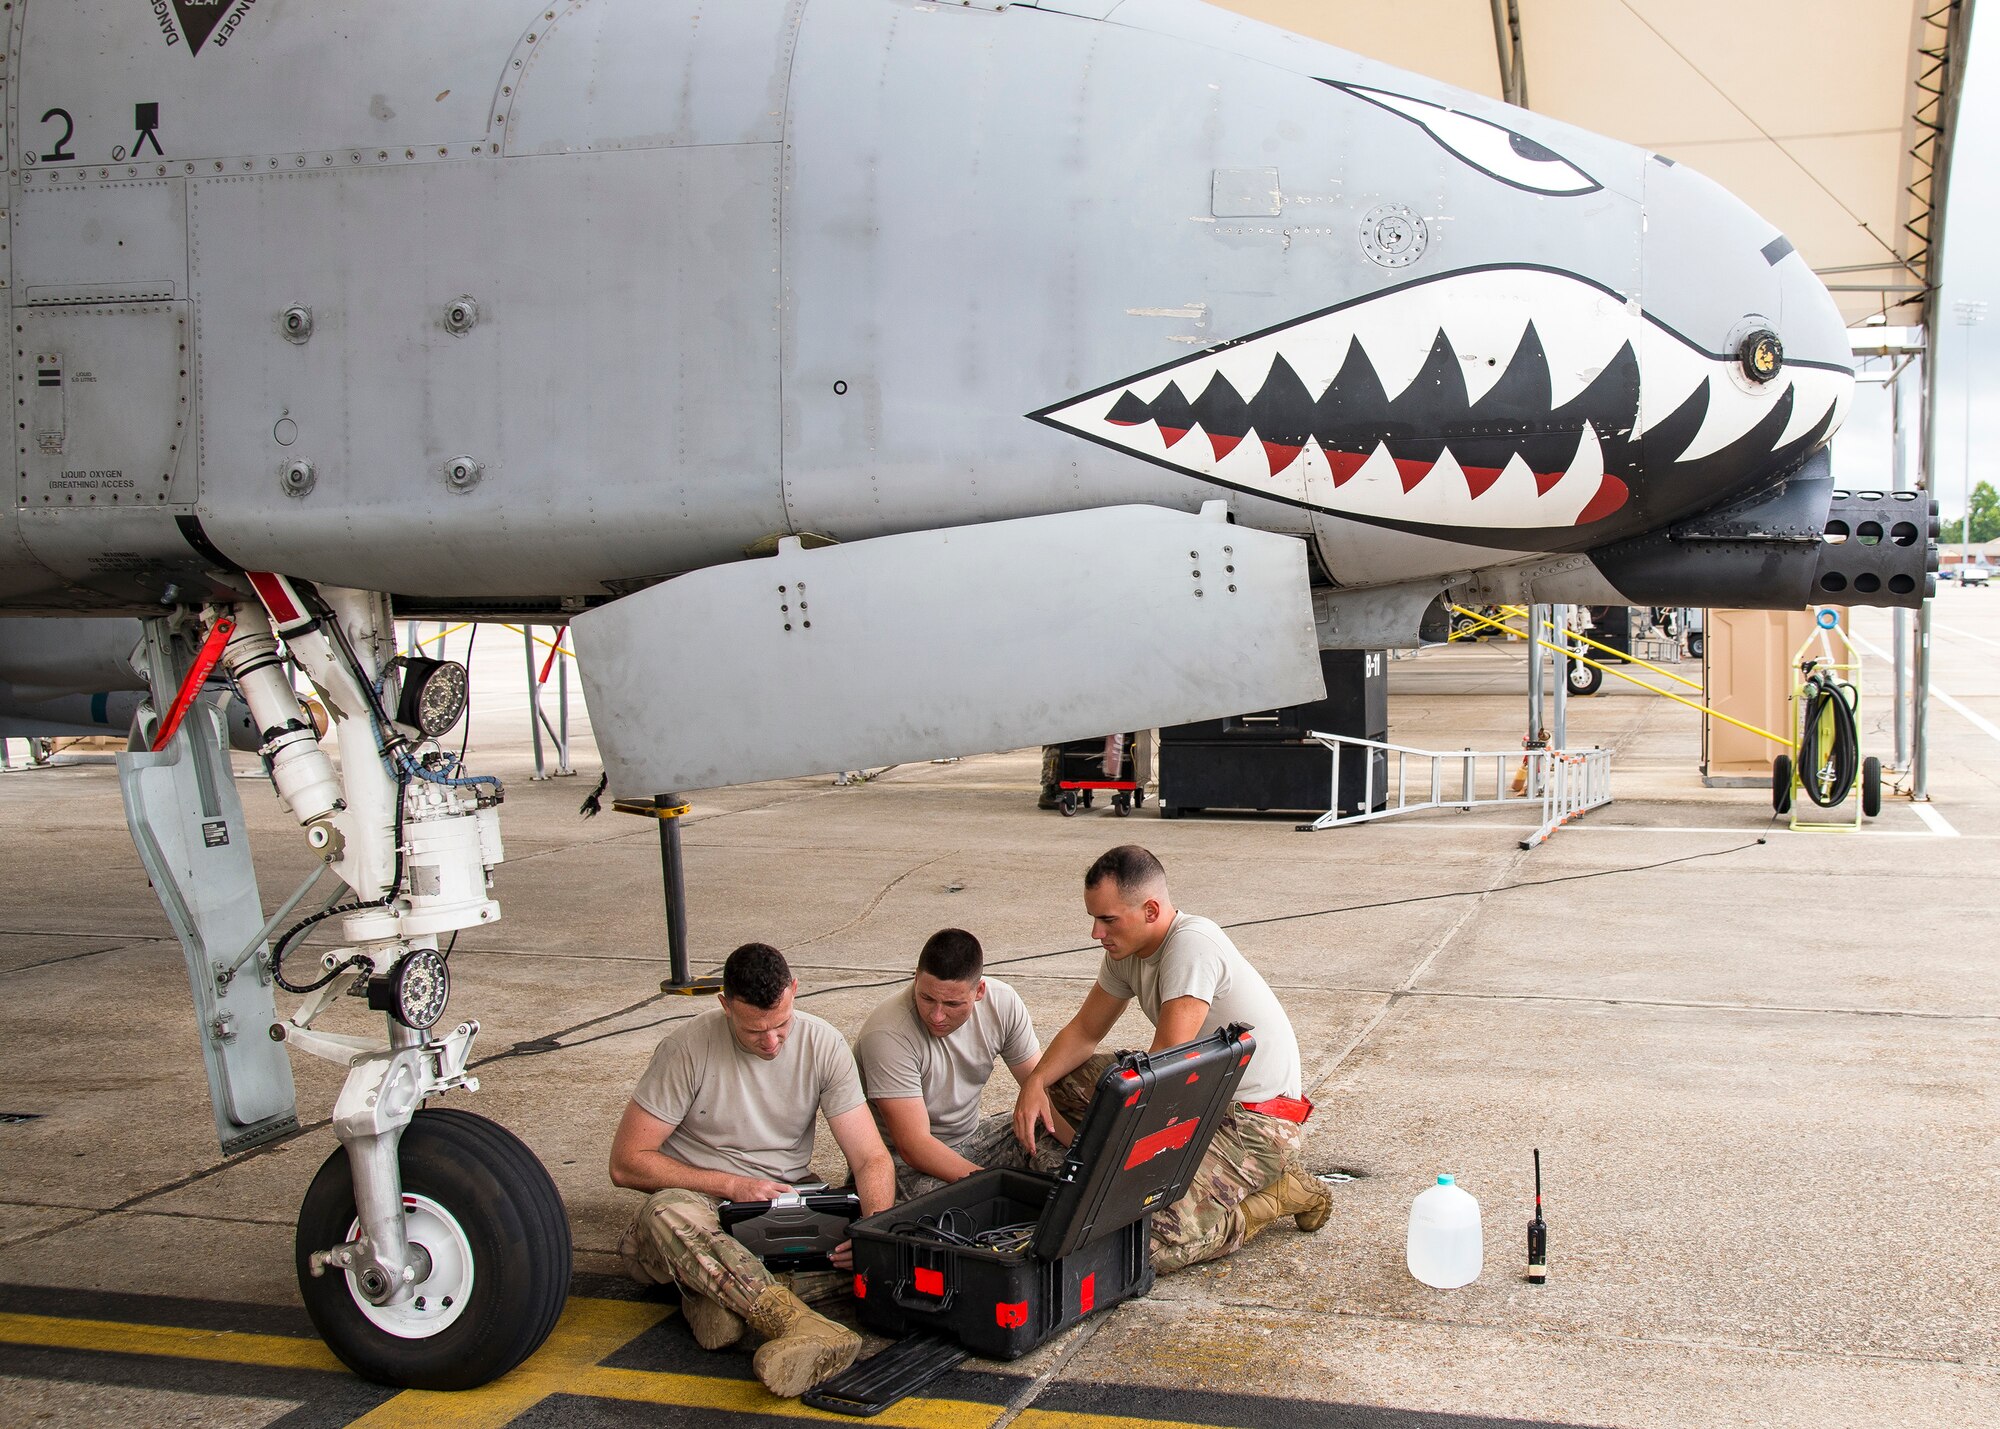 Airmen from the 75th Aircraft Maintenance Unit read a technical order during a sortie surge exercise, July 24, 2019, at Moody Air Force Base, Ga. The exercise was conducted to determine Airmen's abilities to perform effectively while generating combat or training sorties at an accelerated rate. Throughout the four-day surge, pilots and maintainers completed 131 sorties spanning approximately 152 flying hours. (U.S. Air Force photo by Airman 1st Class Eugene Oliver)